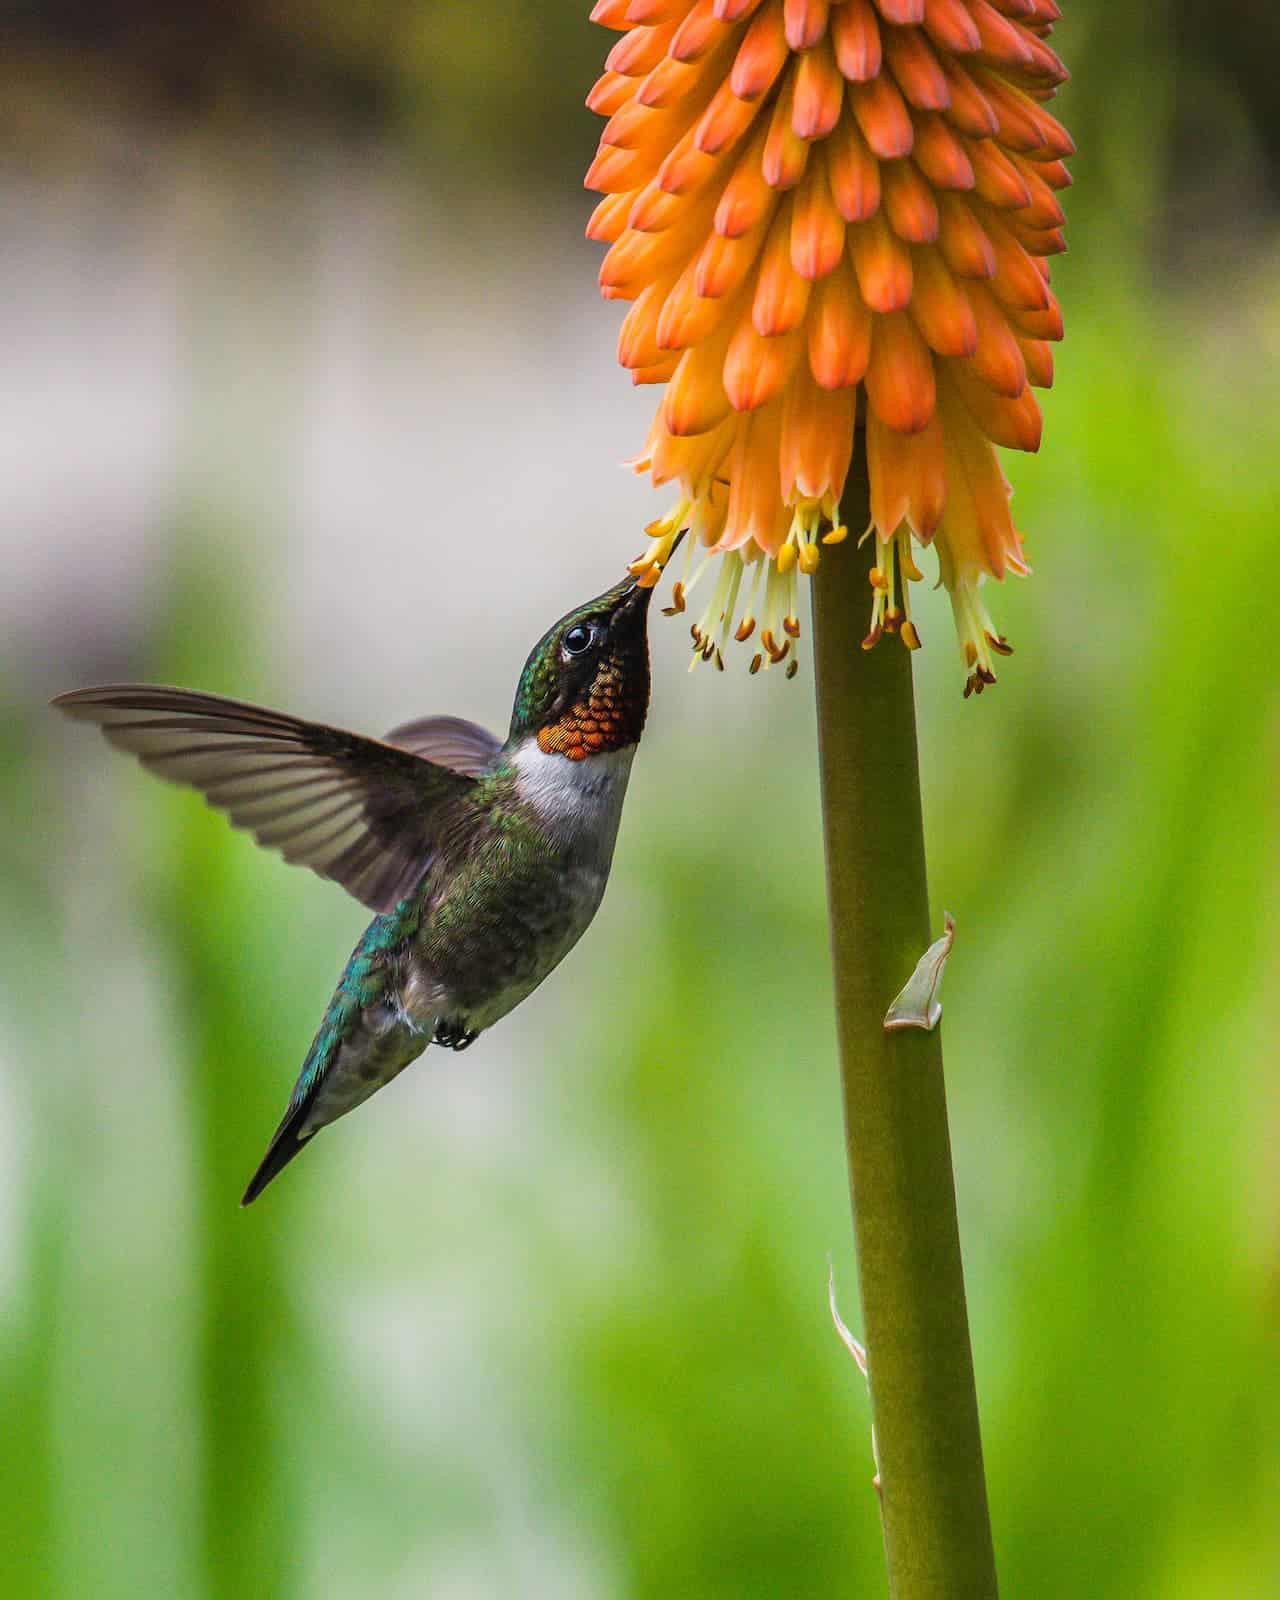 The Ruby-throated Hummingbird Feeds In The Flowers